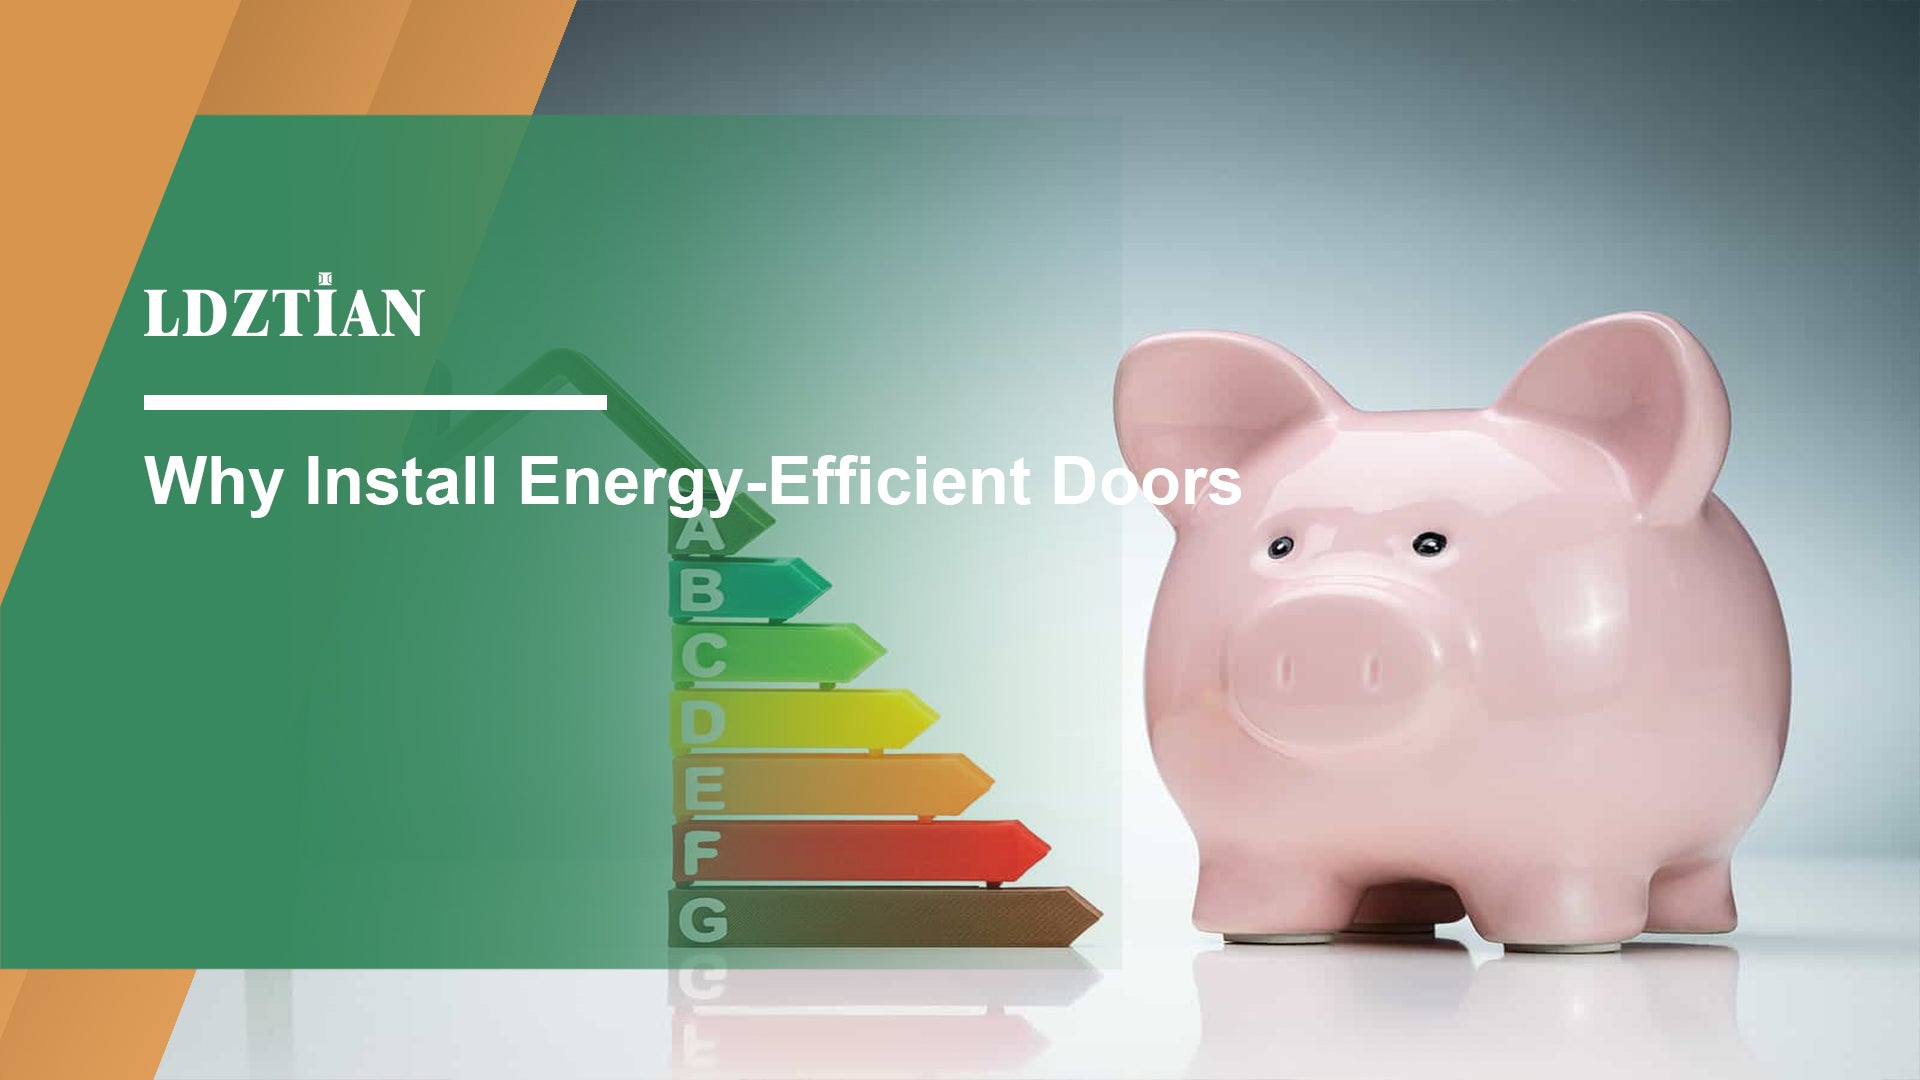 Why Install Energy-Efficient Doors?